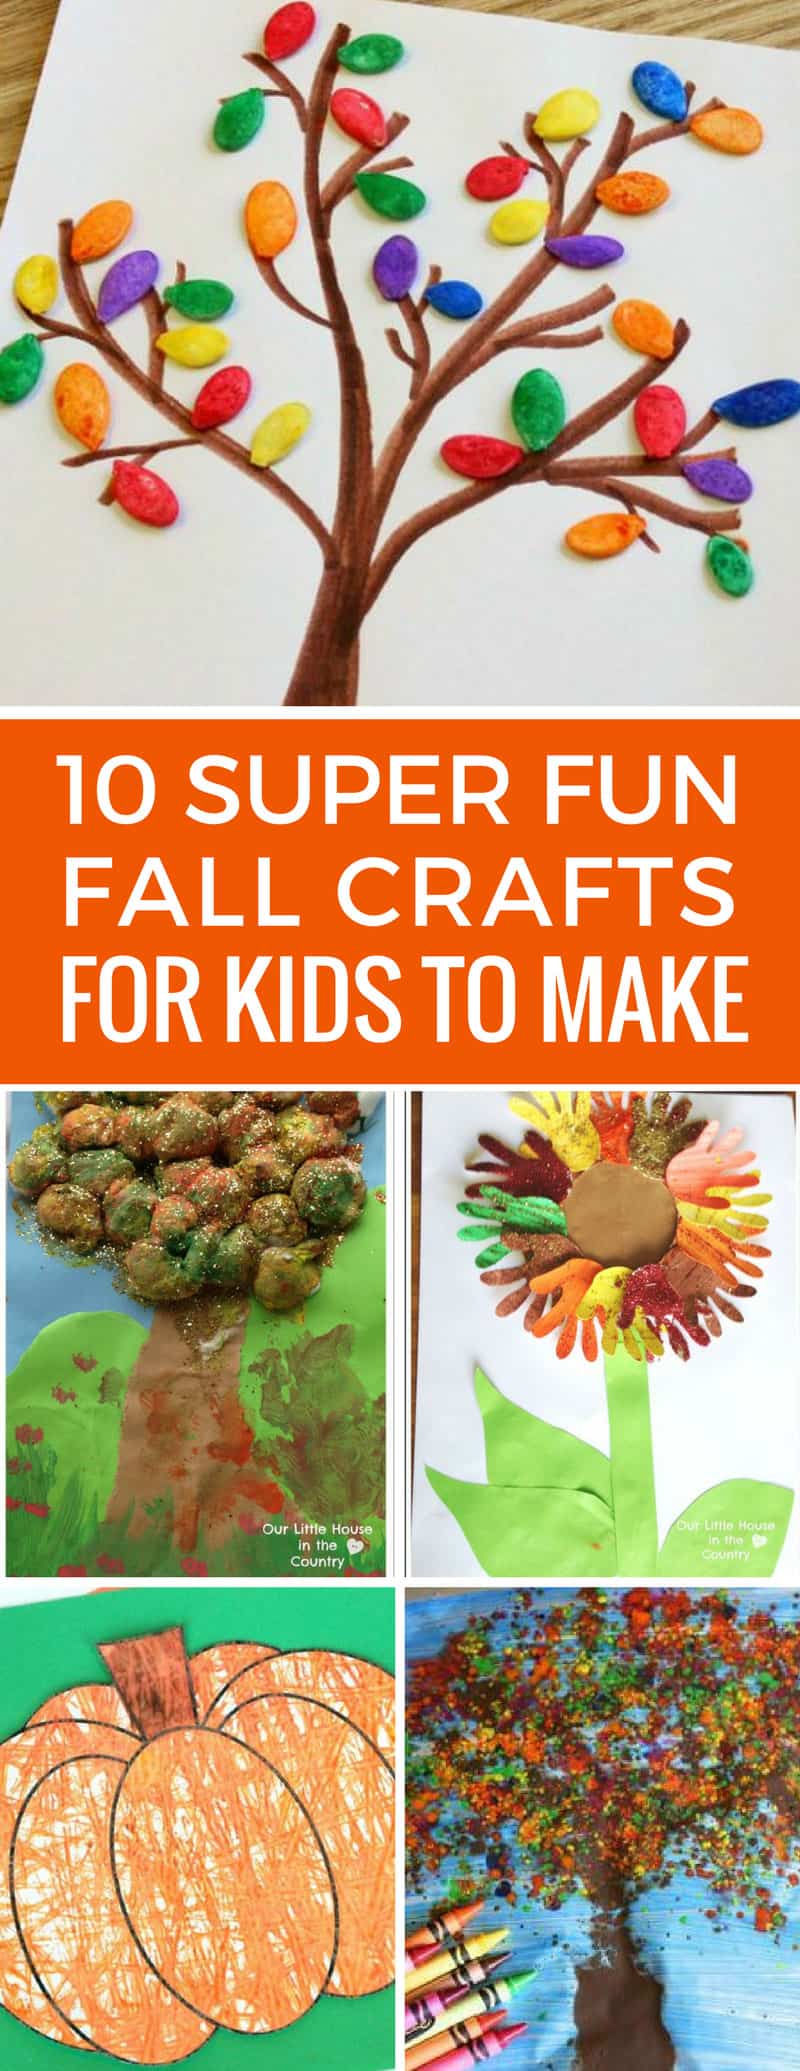 Oh these easy Fall crafts for kids look brilliant - can't wait to try the cotton wool tree! Thanks for sharing!